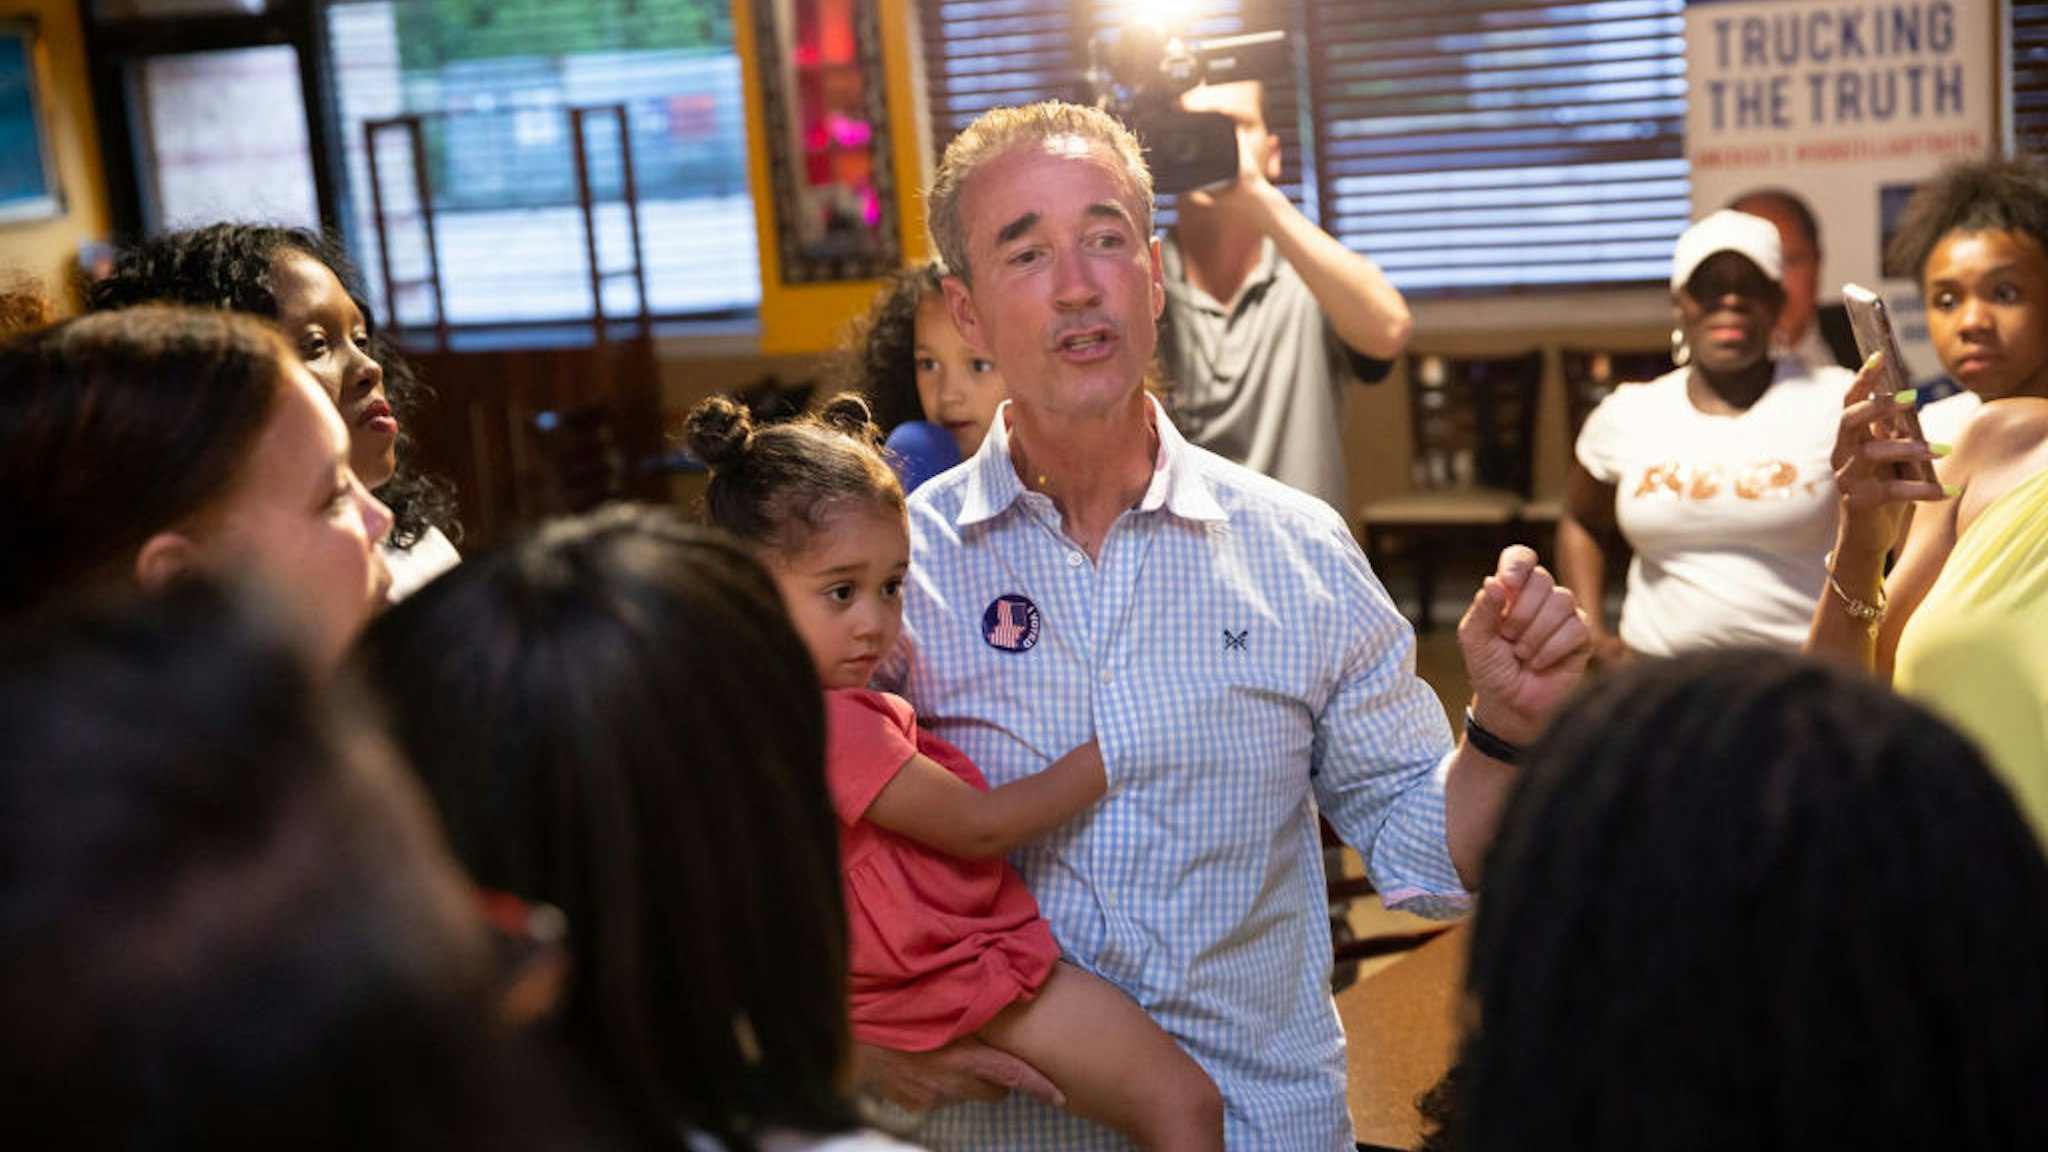 Virginia state senate candidate Joe Morrissey talks to supporters after winning the primary vote at Plaza Mexico Mexican Restaurant in Petersburg, VA on June 11, 2019.